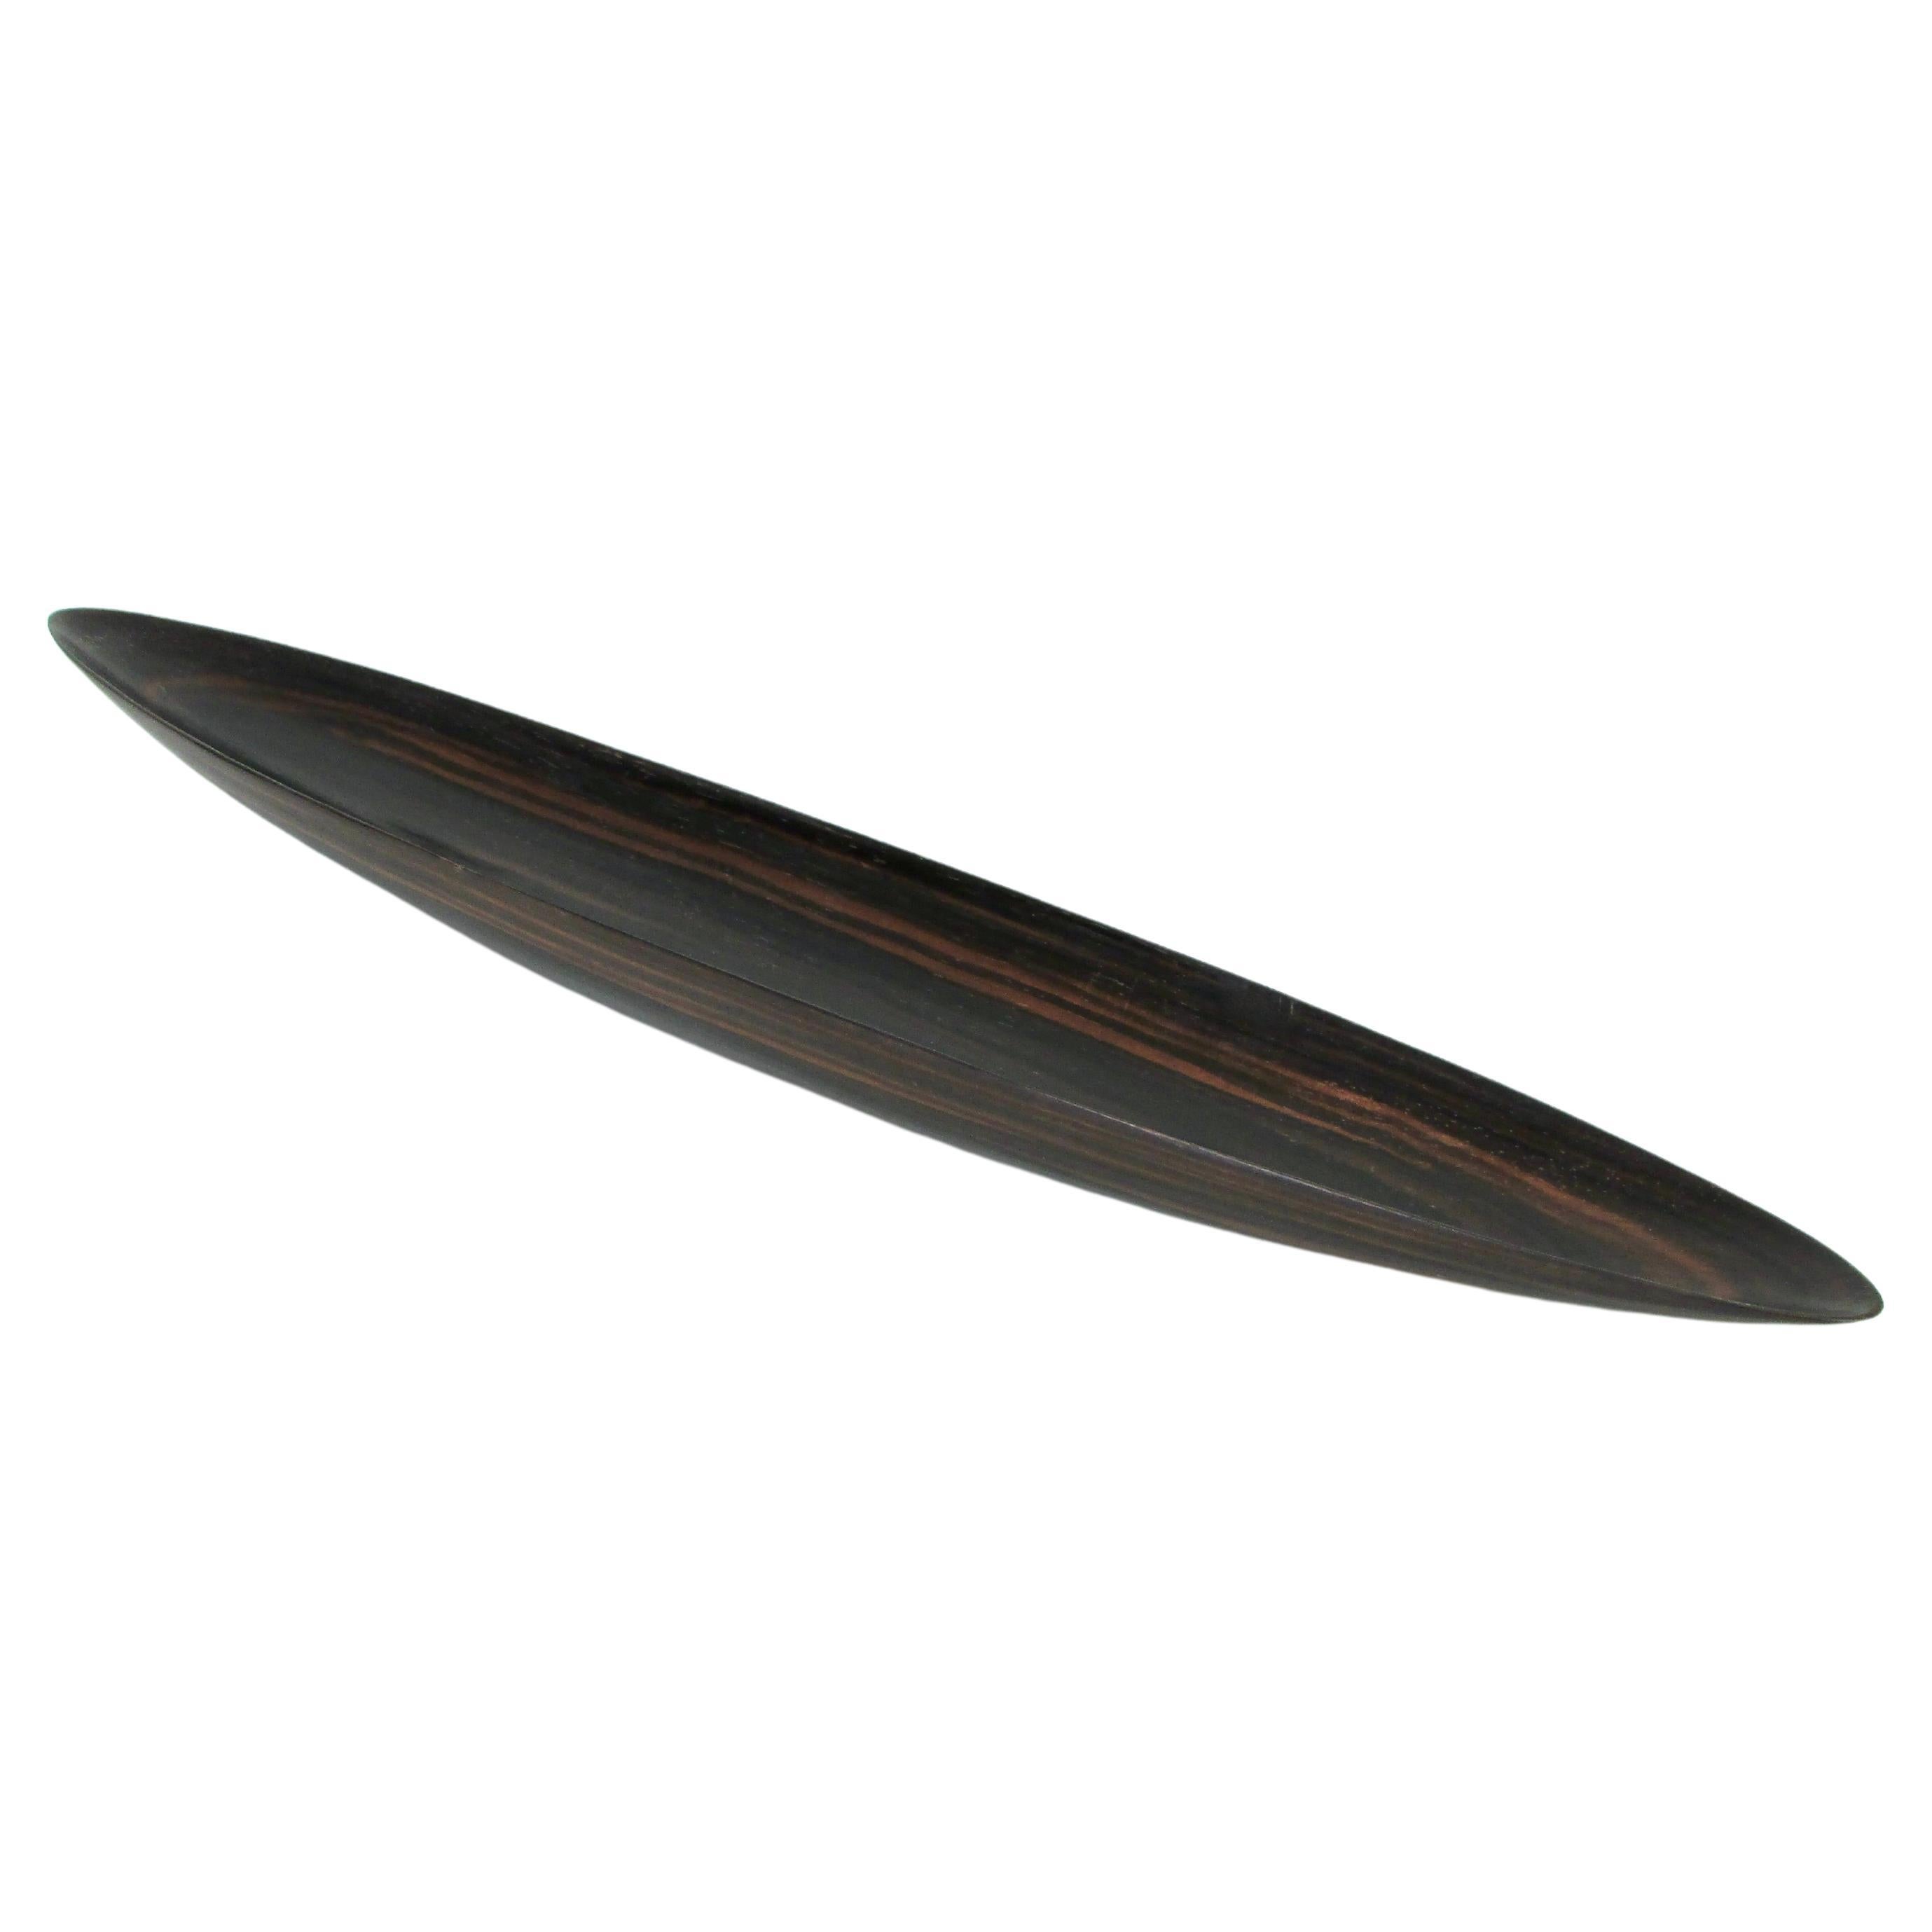 Hand carved Rosewood canoe shape dish For Sale